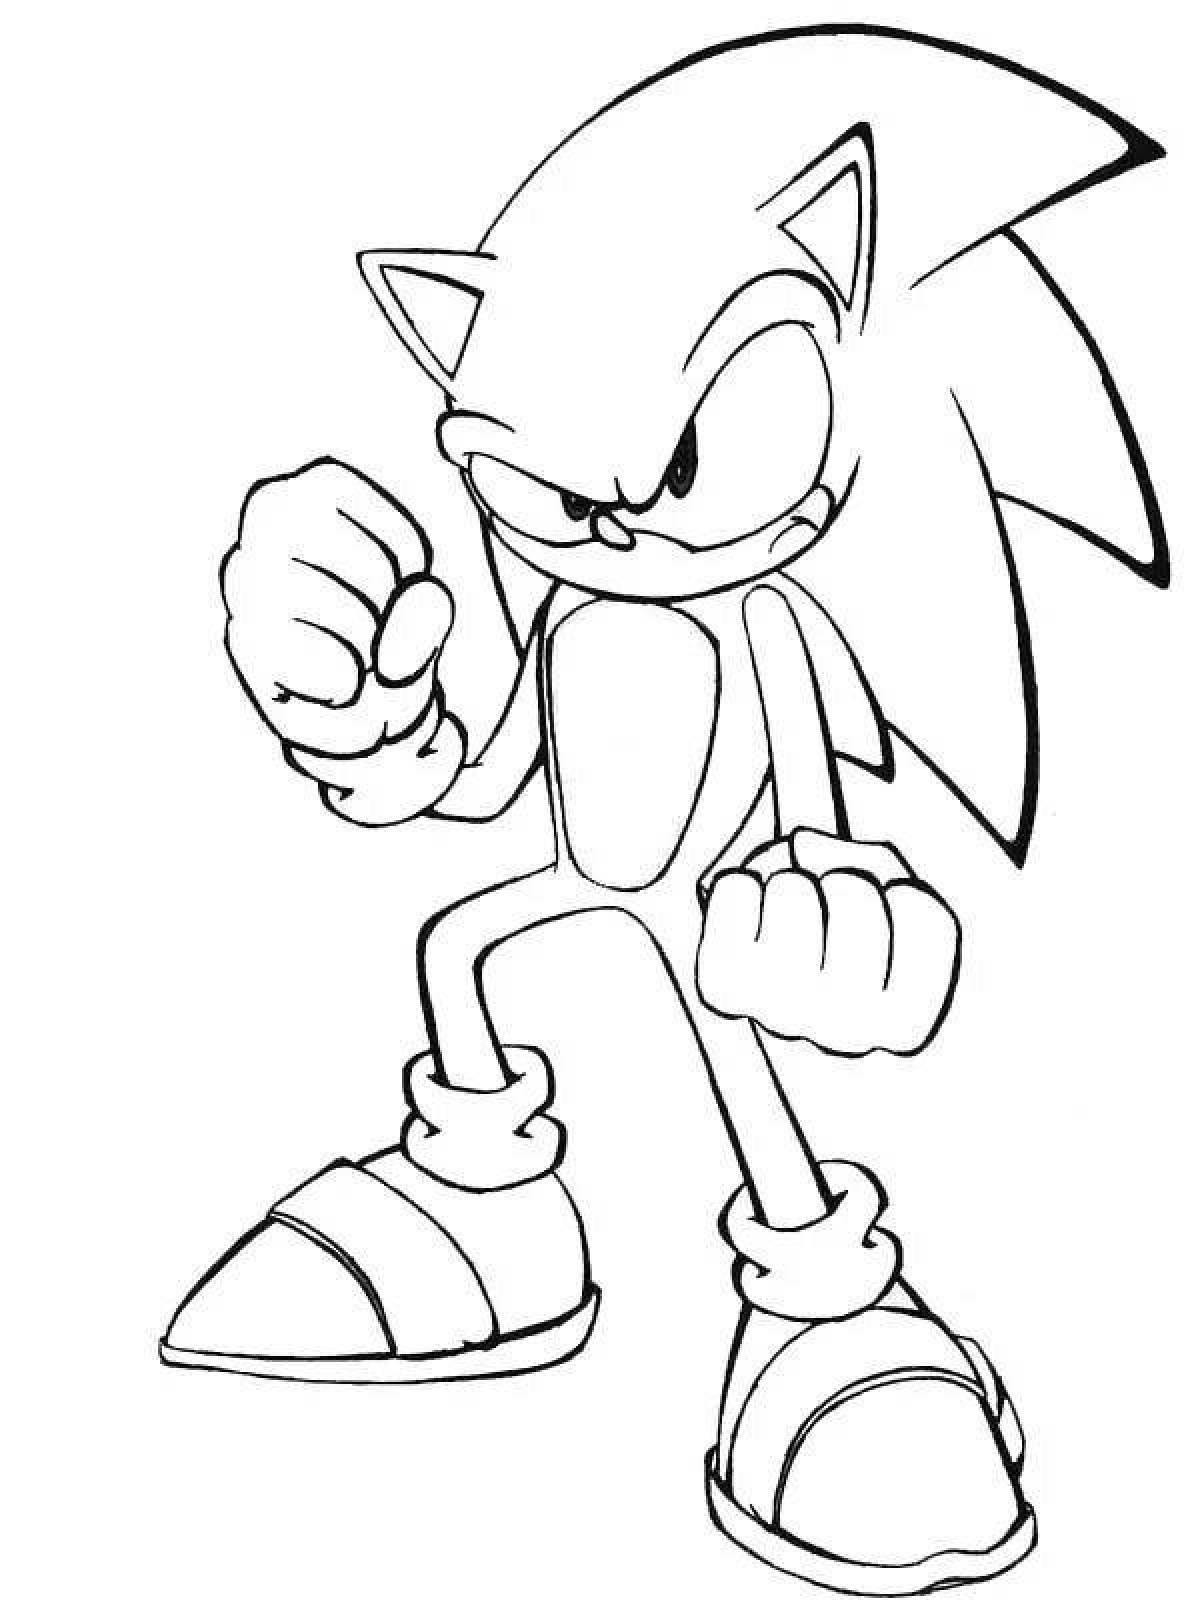 Lovely sonic egze coloring page